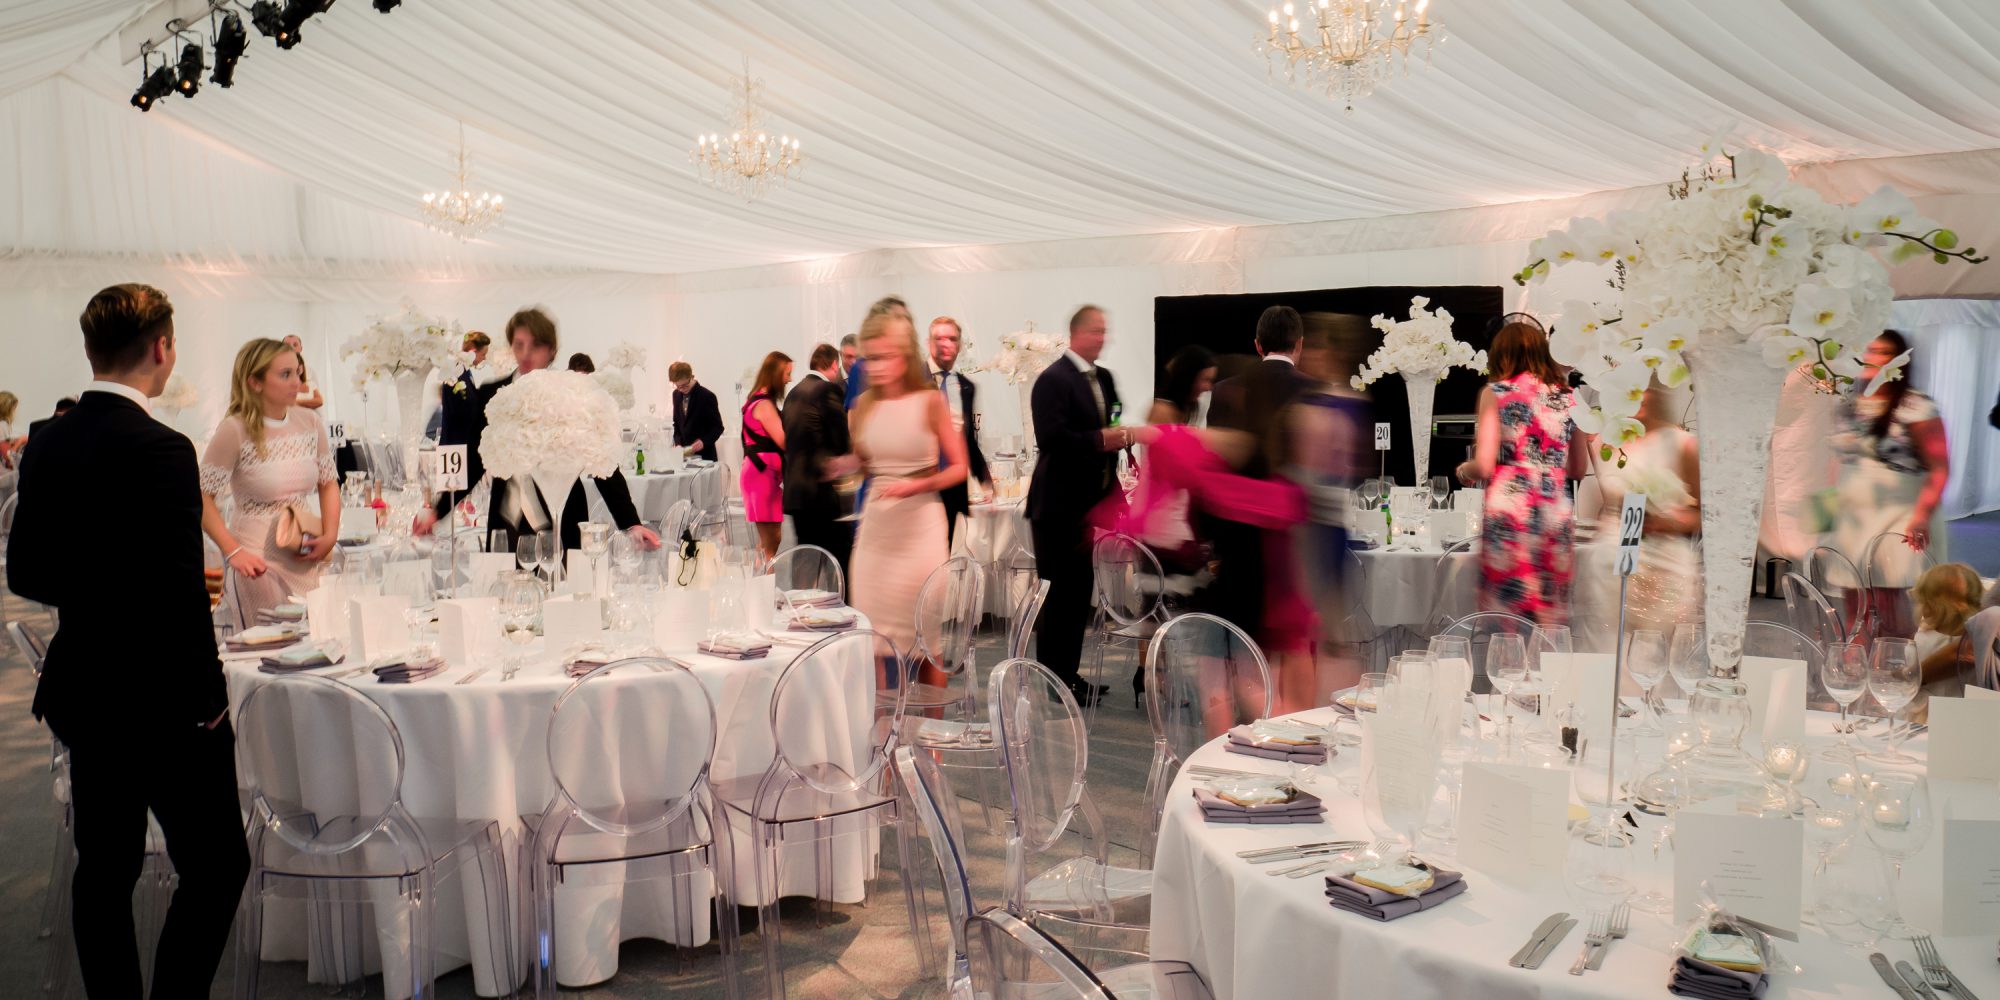 Wedding planner, event planner, and party planner based in London & Herts